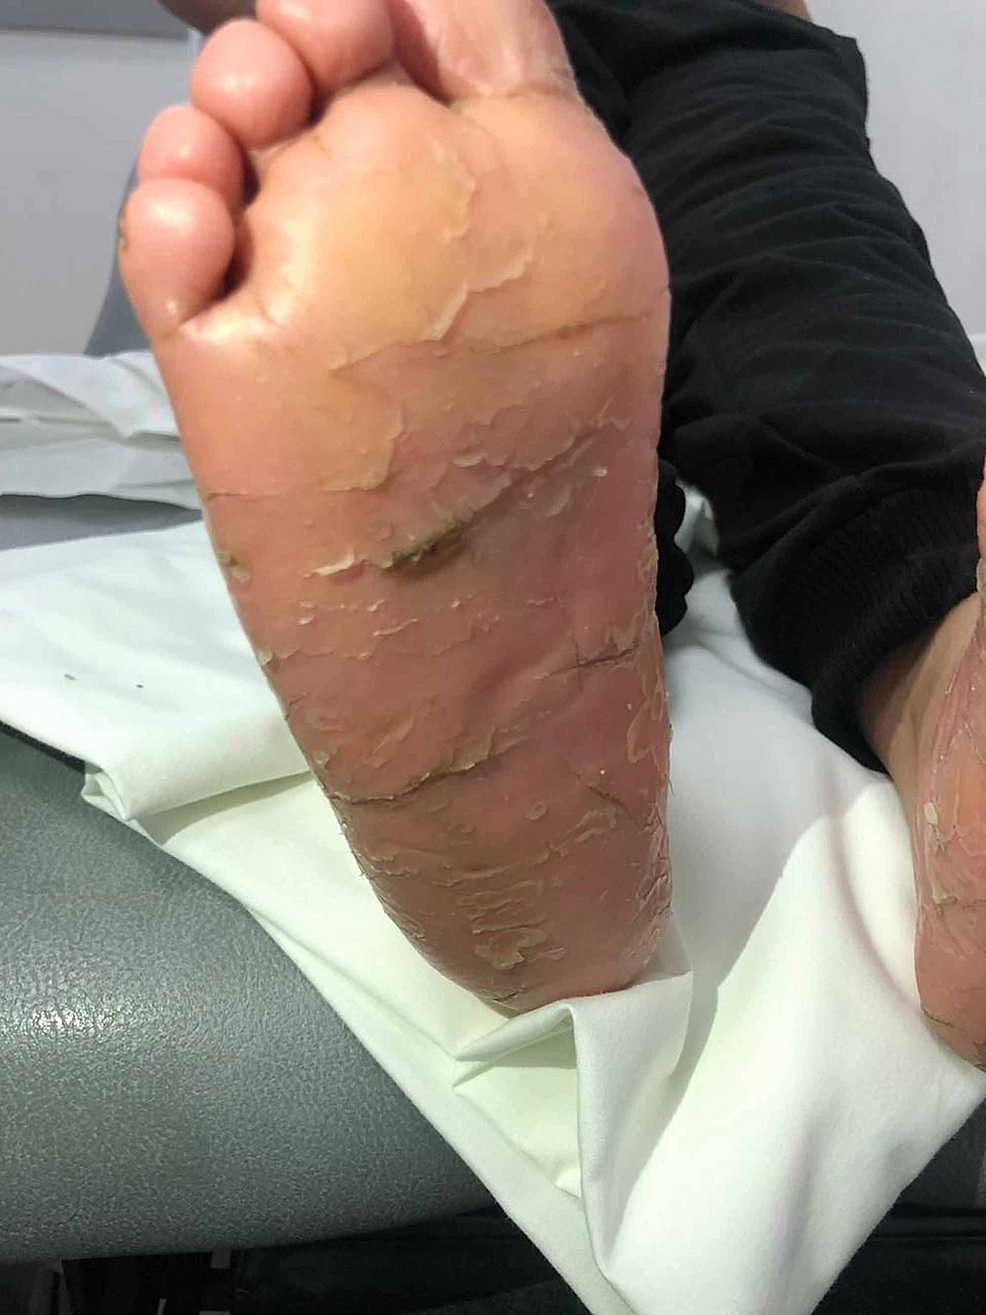 Erythematous-hyperkeratotic-skin-plaques-and-papules-with-scales-over-the-soles-of-both-feet.